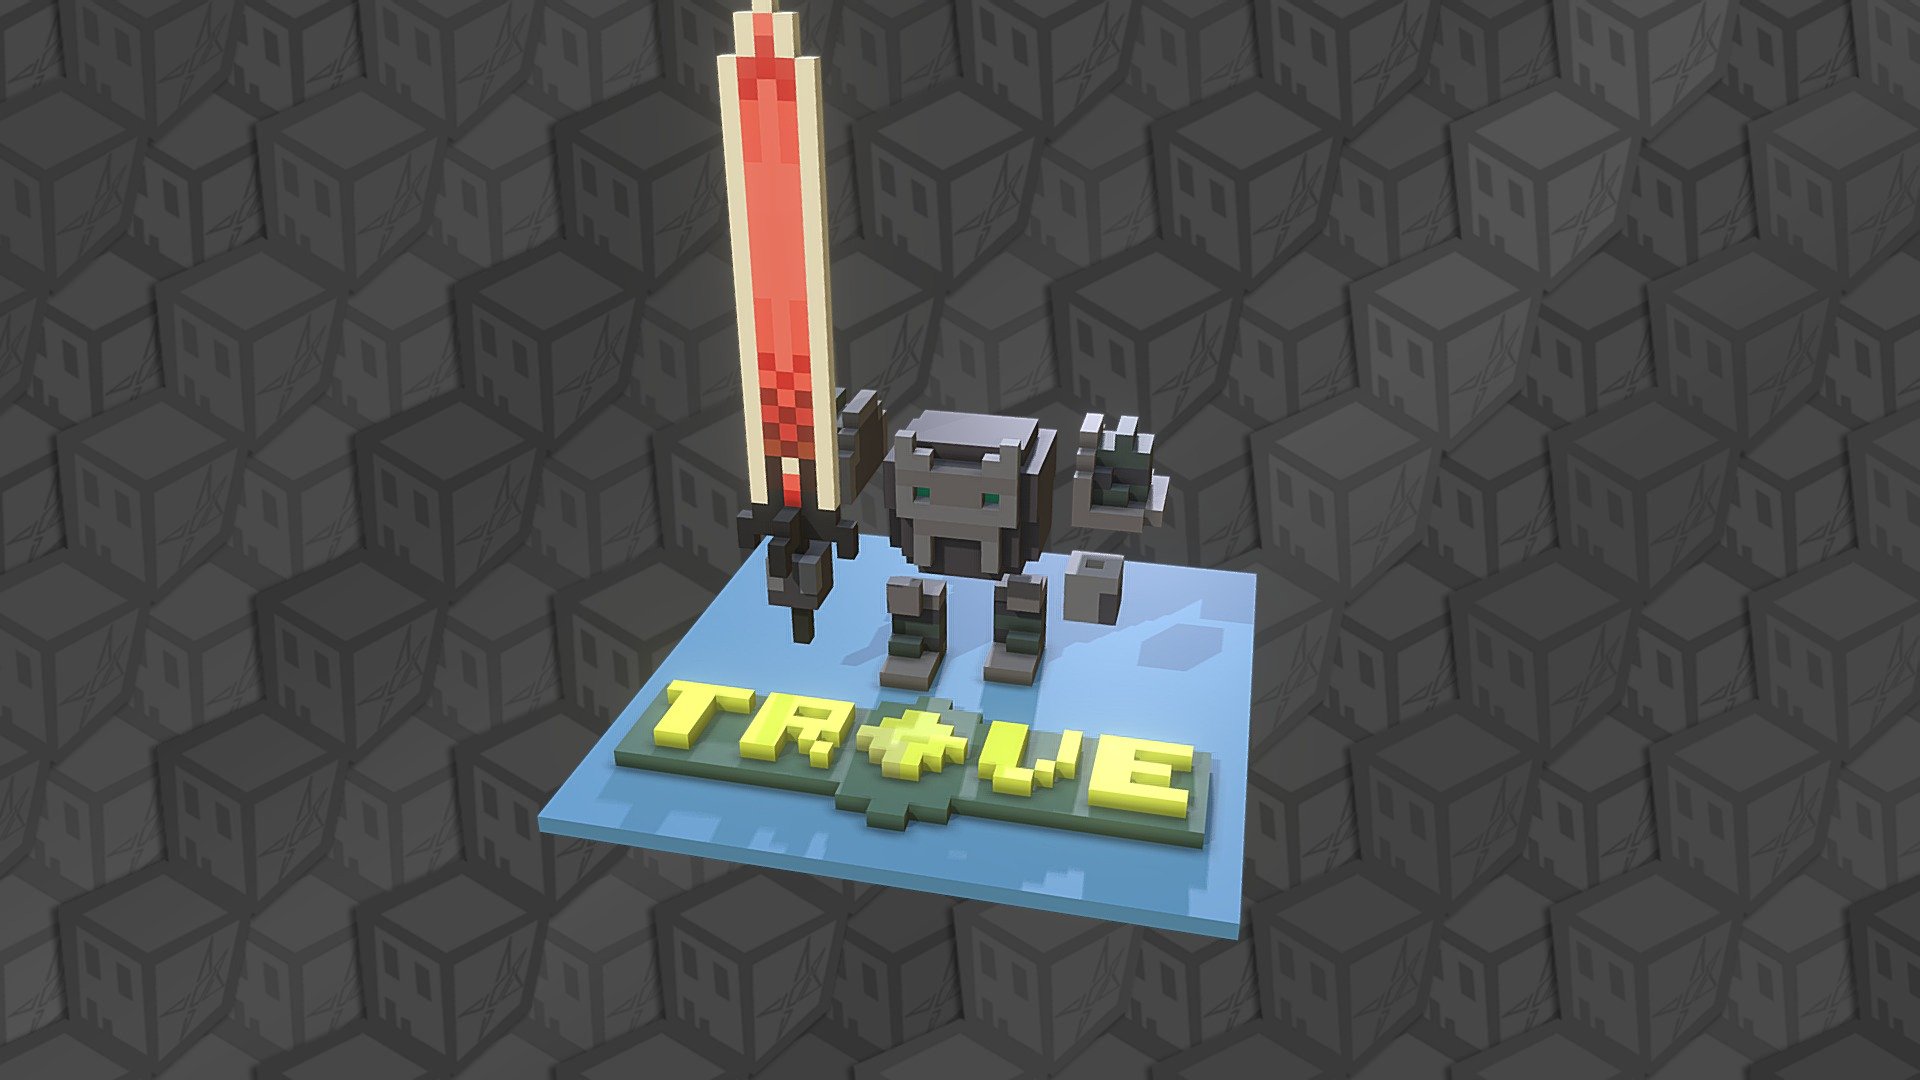 is trove free to play